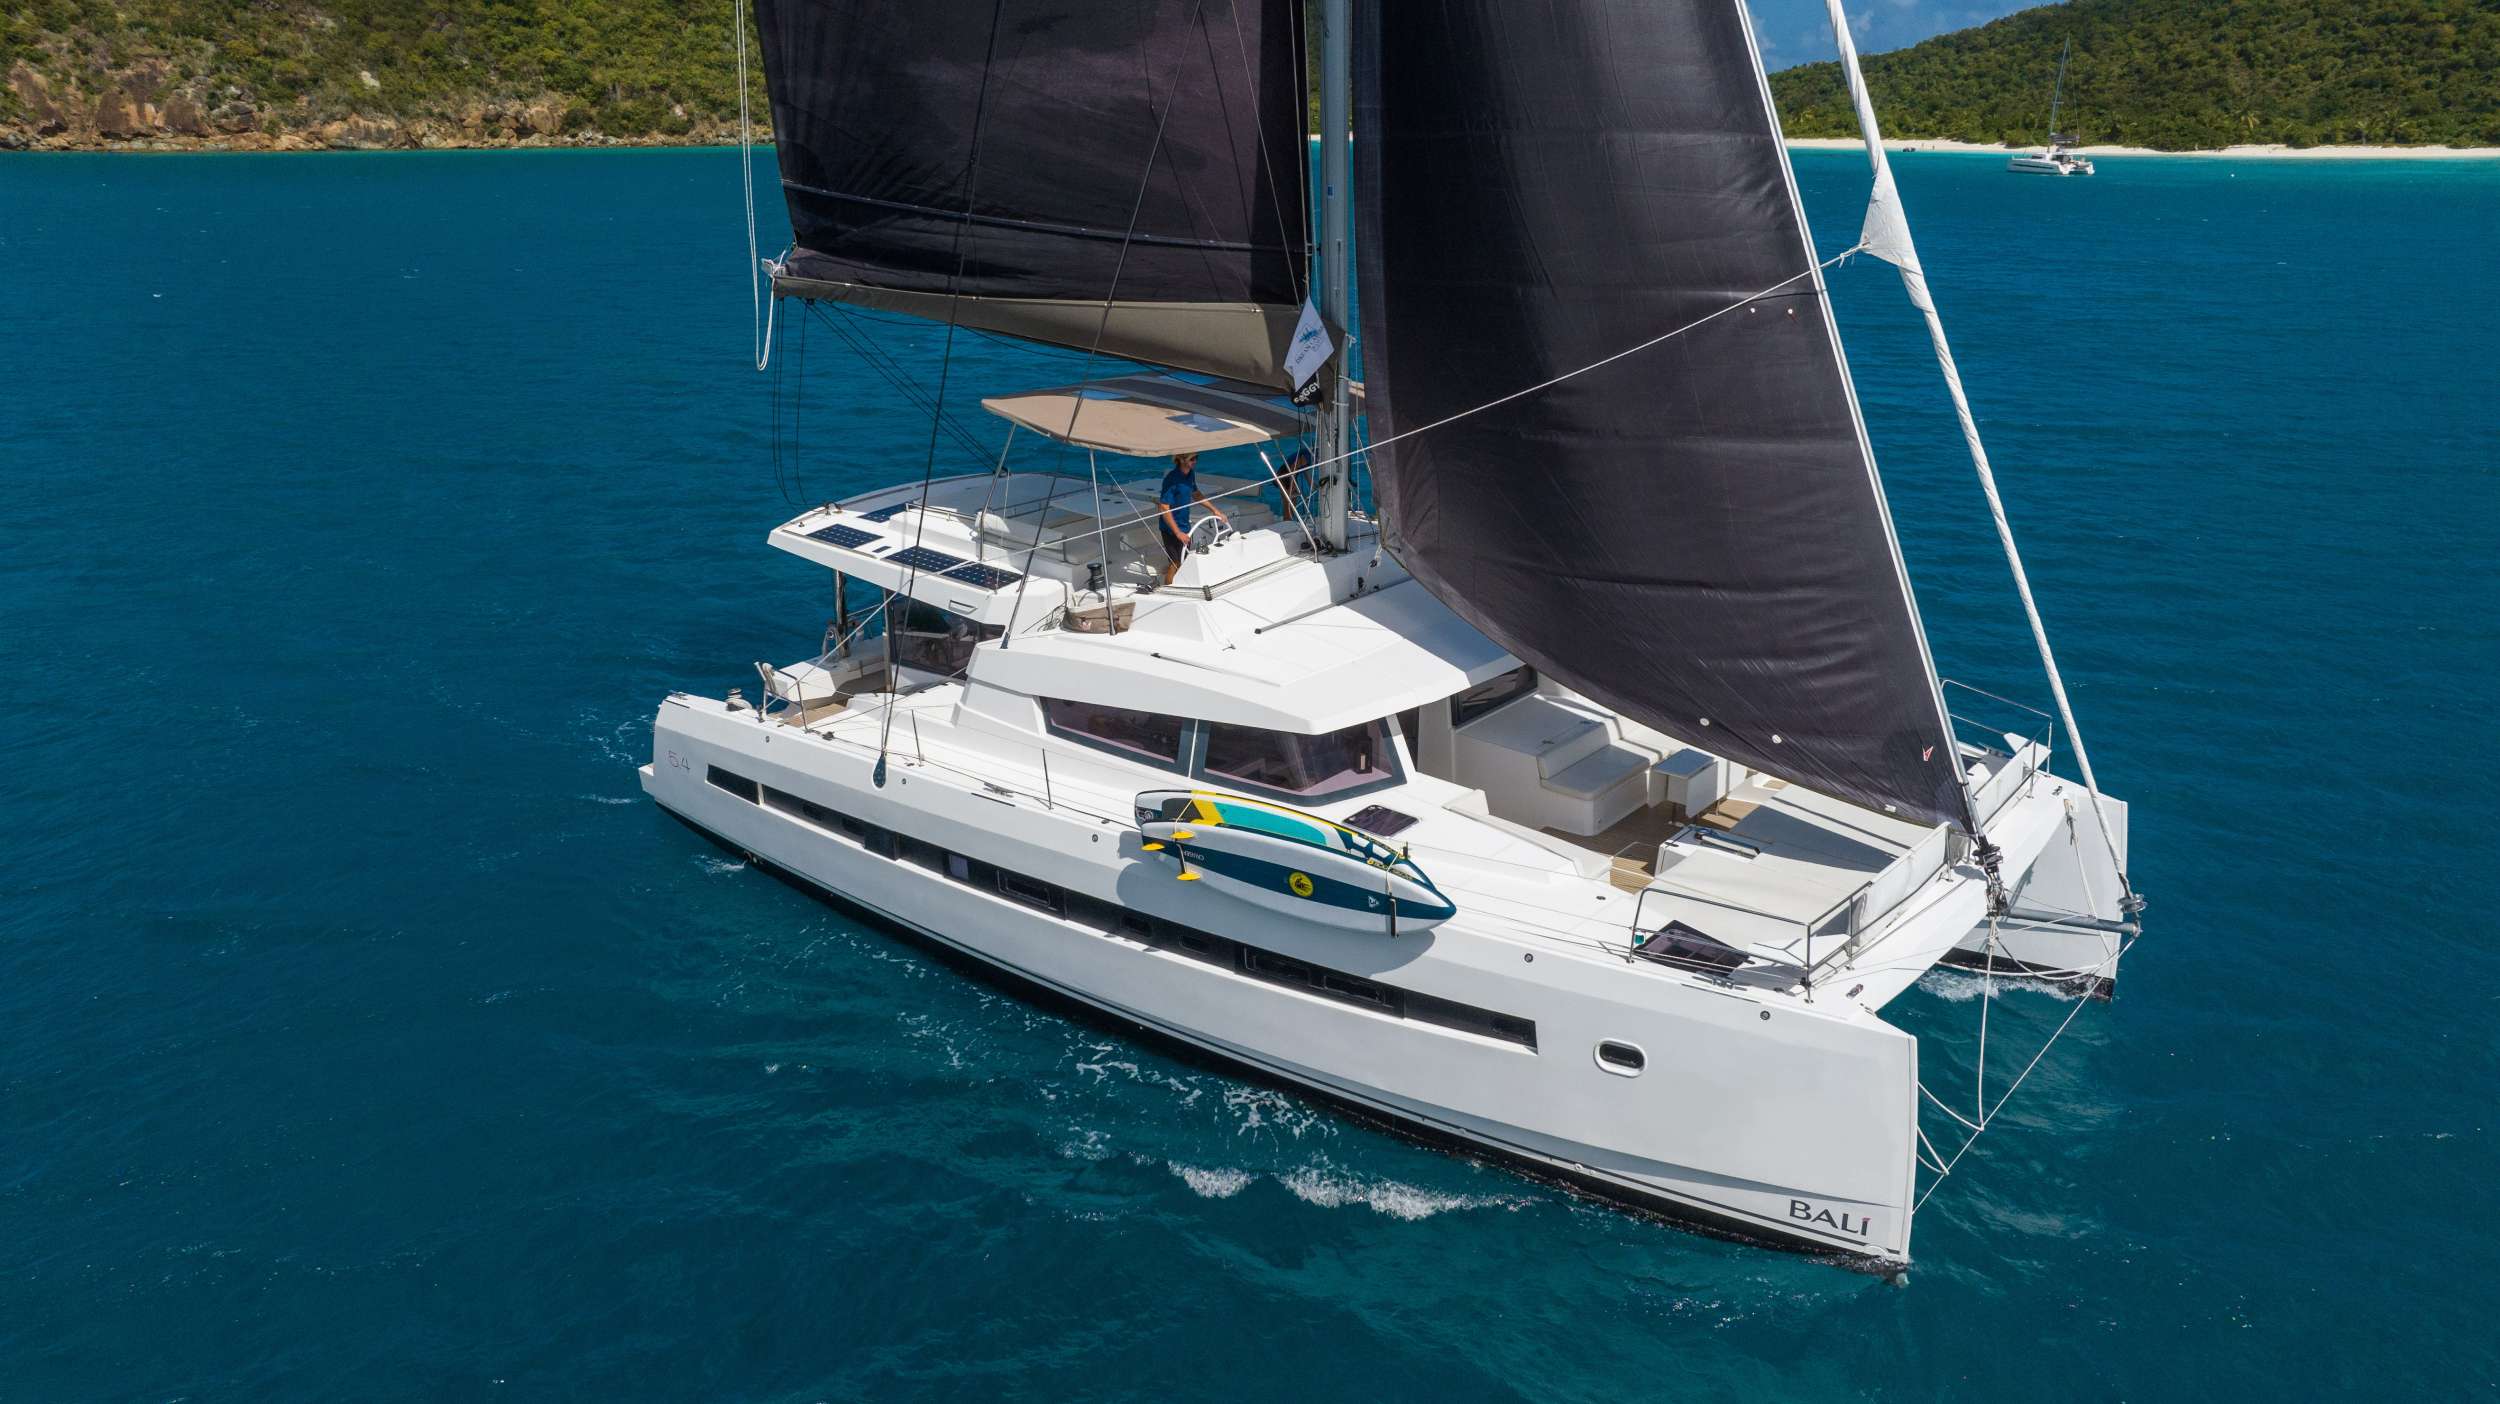 SUN DAZE 5.4 - Yacht Charter Saint Vincent and the Grenadines & Boat hire in Caribbean 1